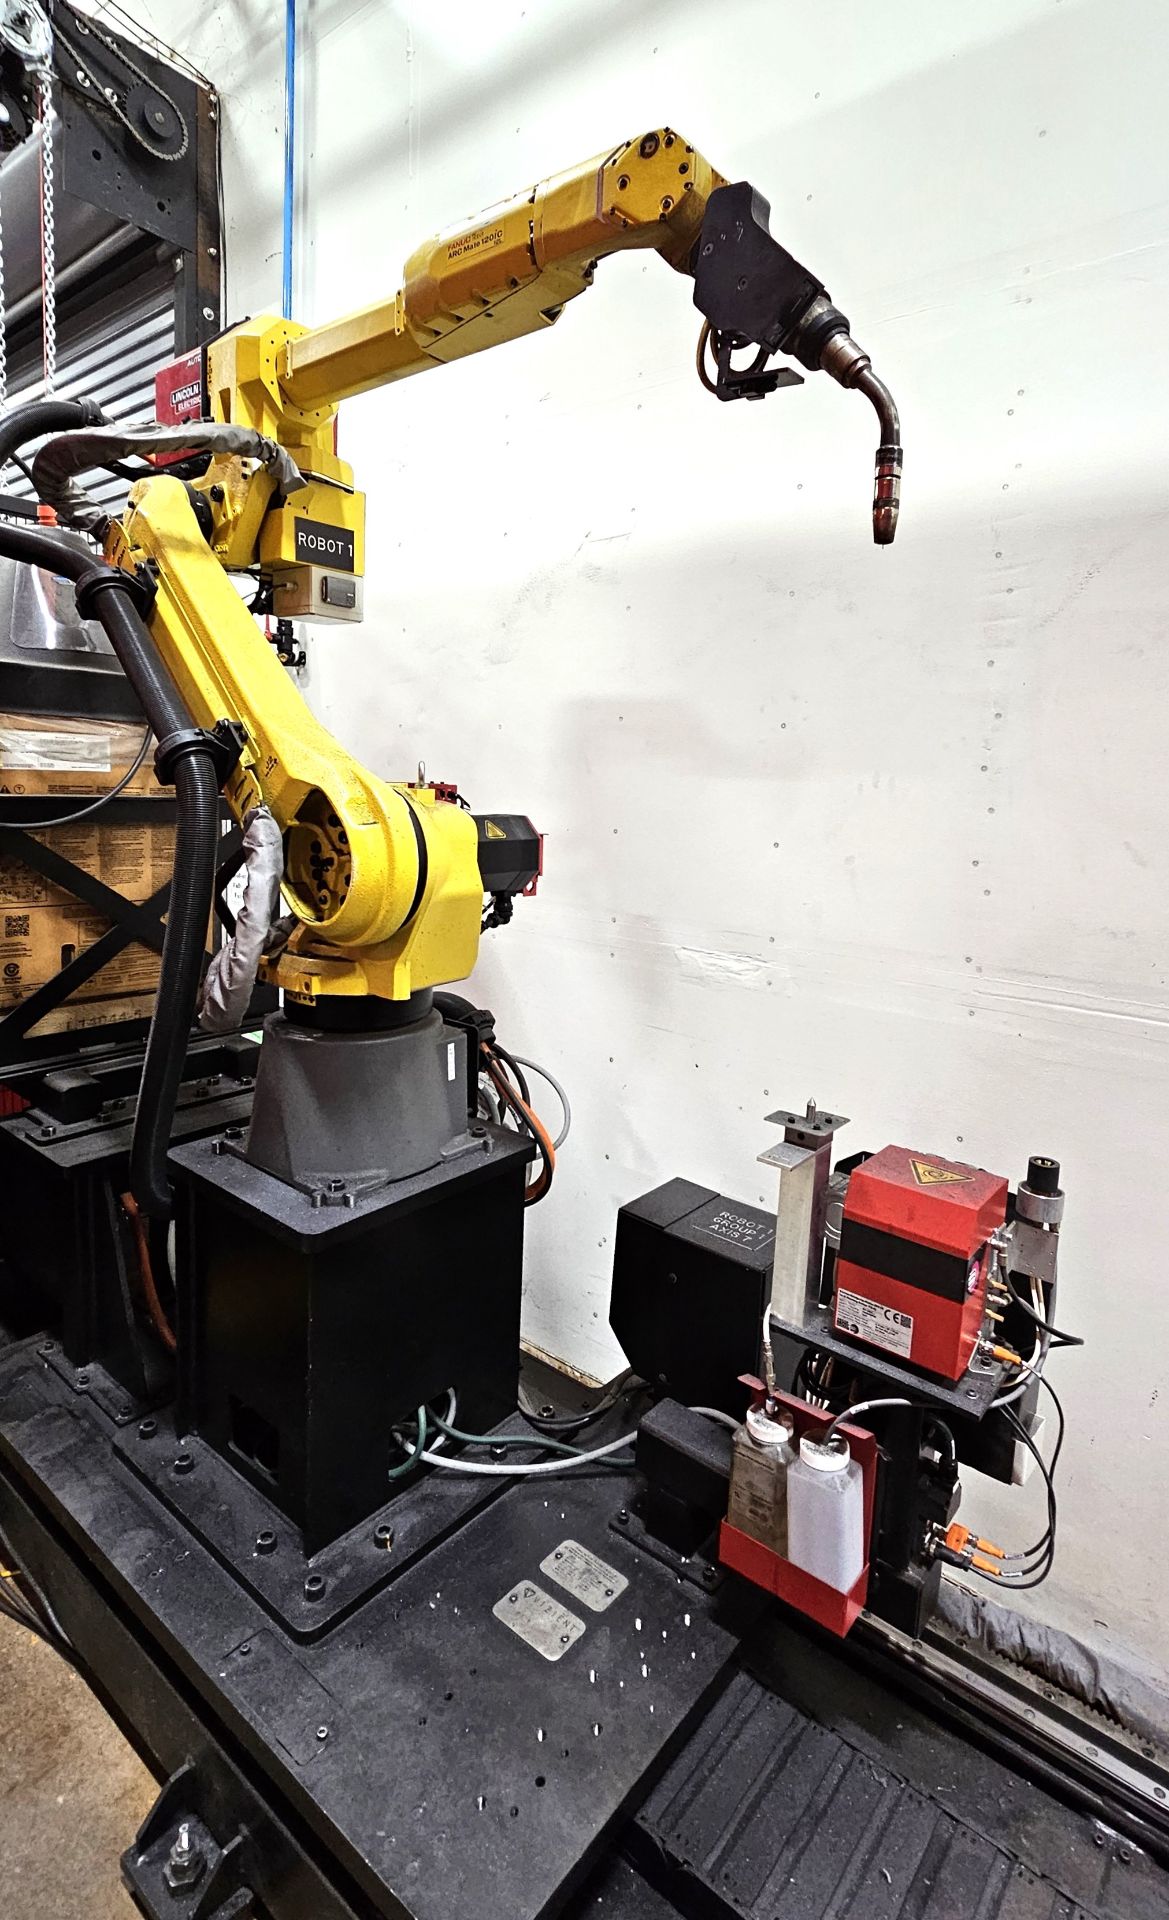 Lincoln/Fanuc Robotic Welding System - Image 11 of 26